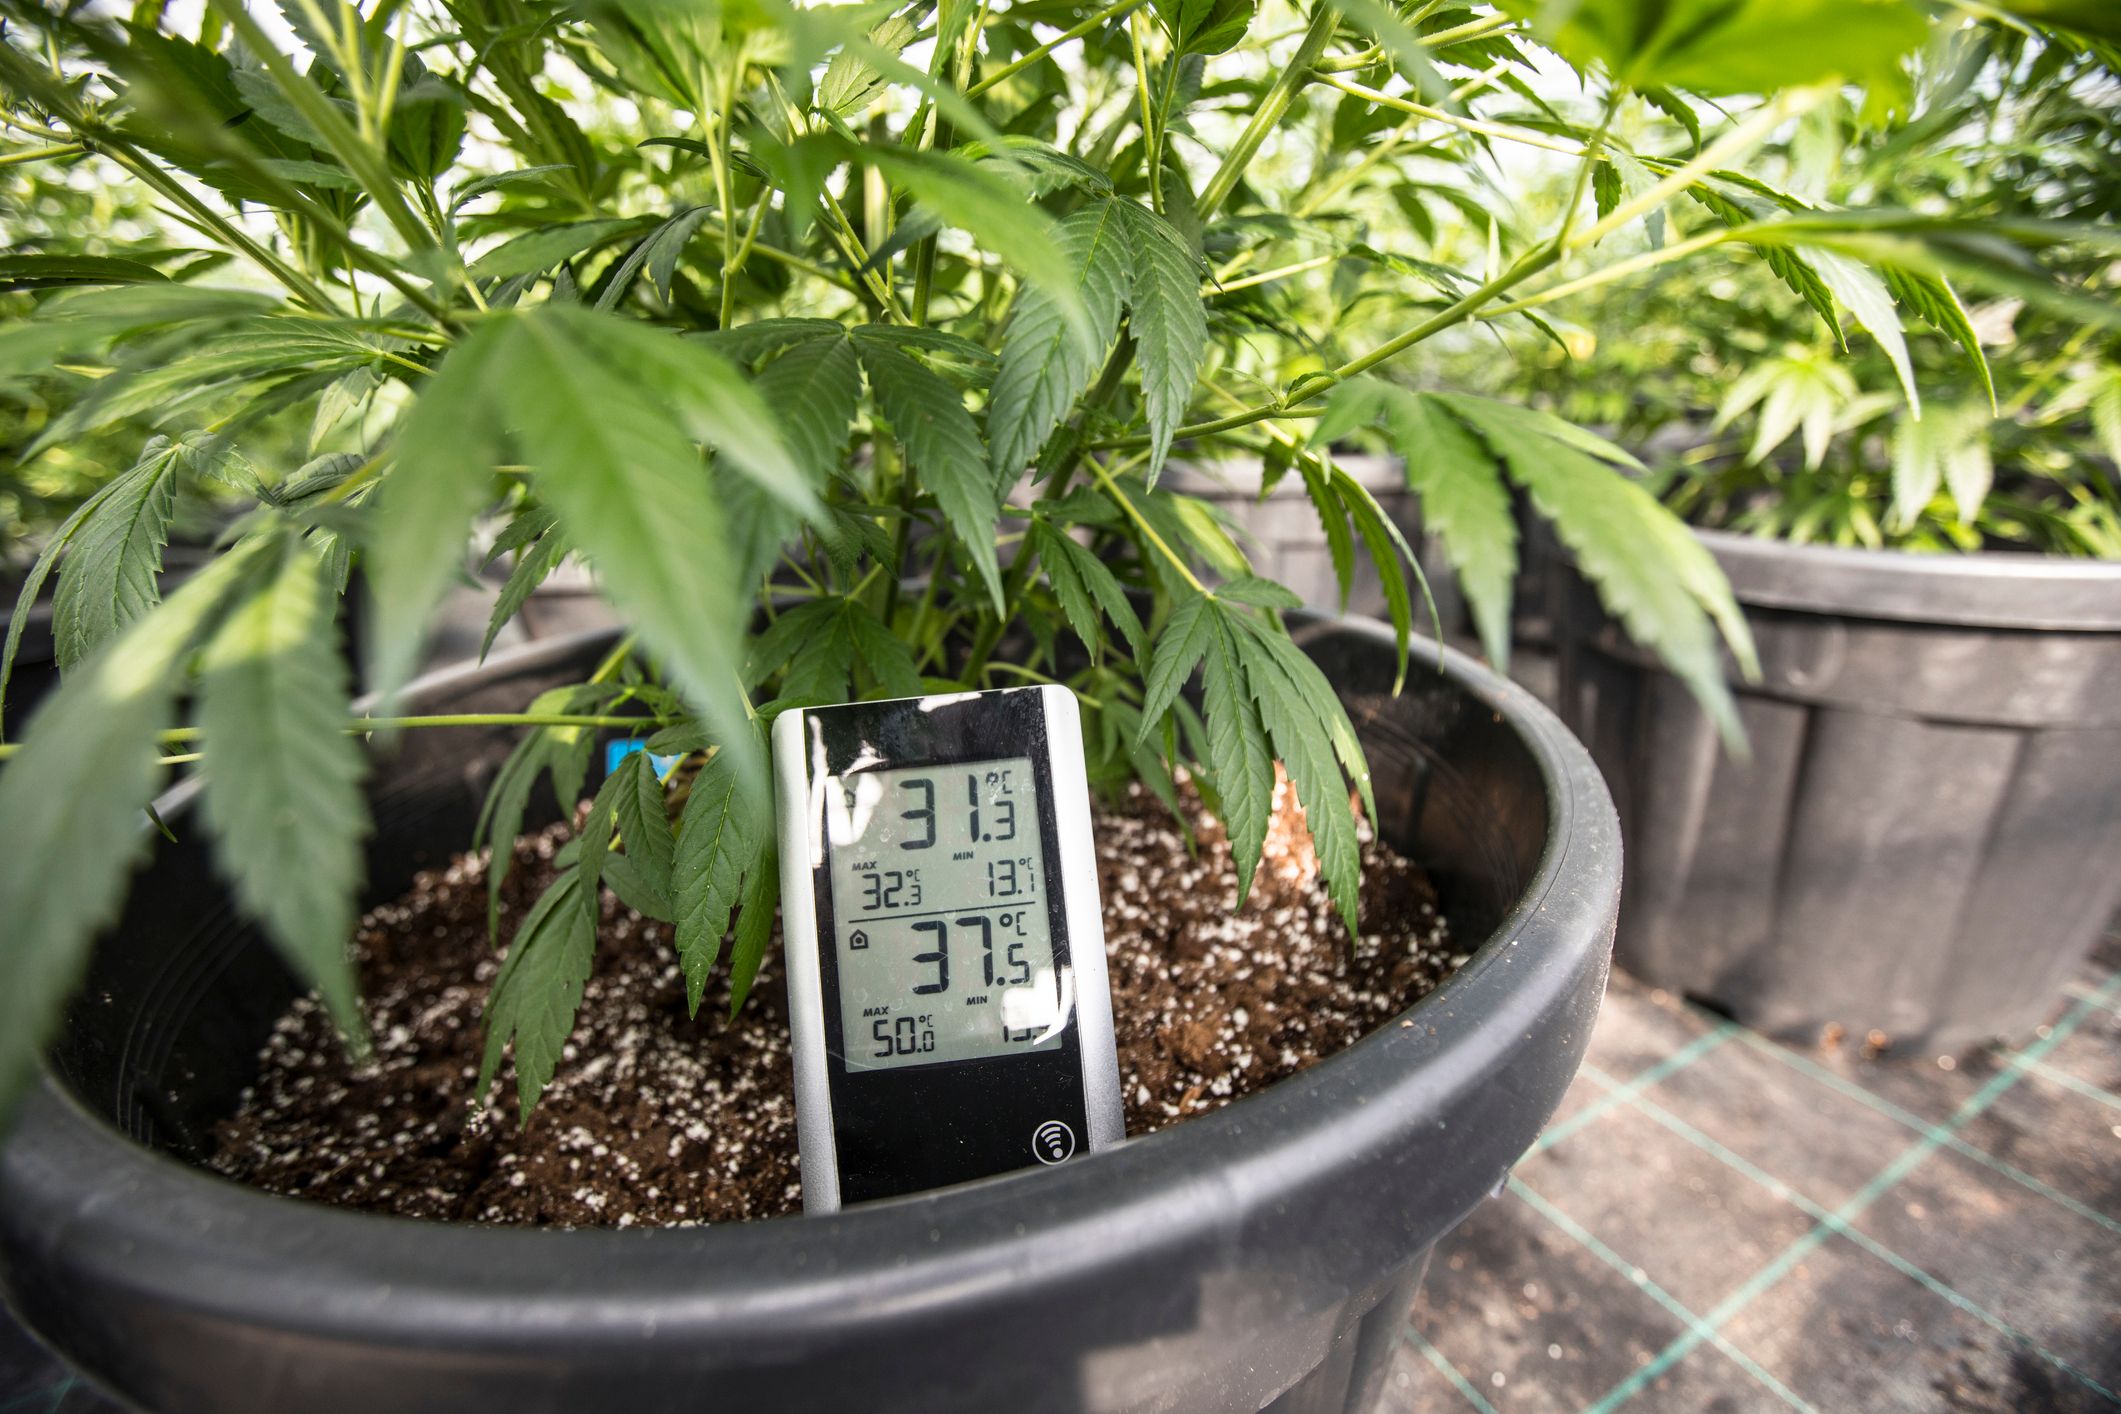 Digital thermometer in flower pot next to cannabis plant